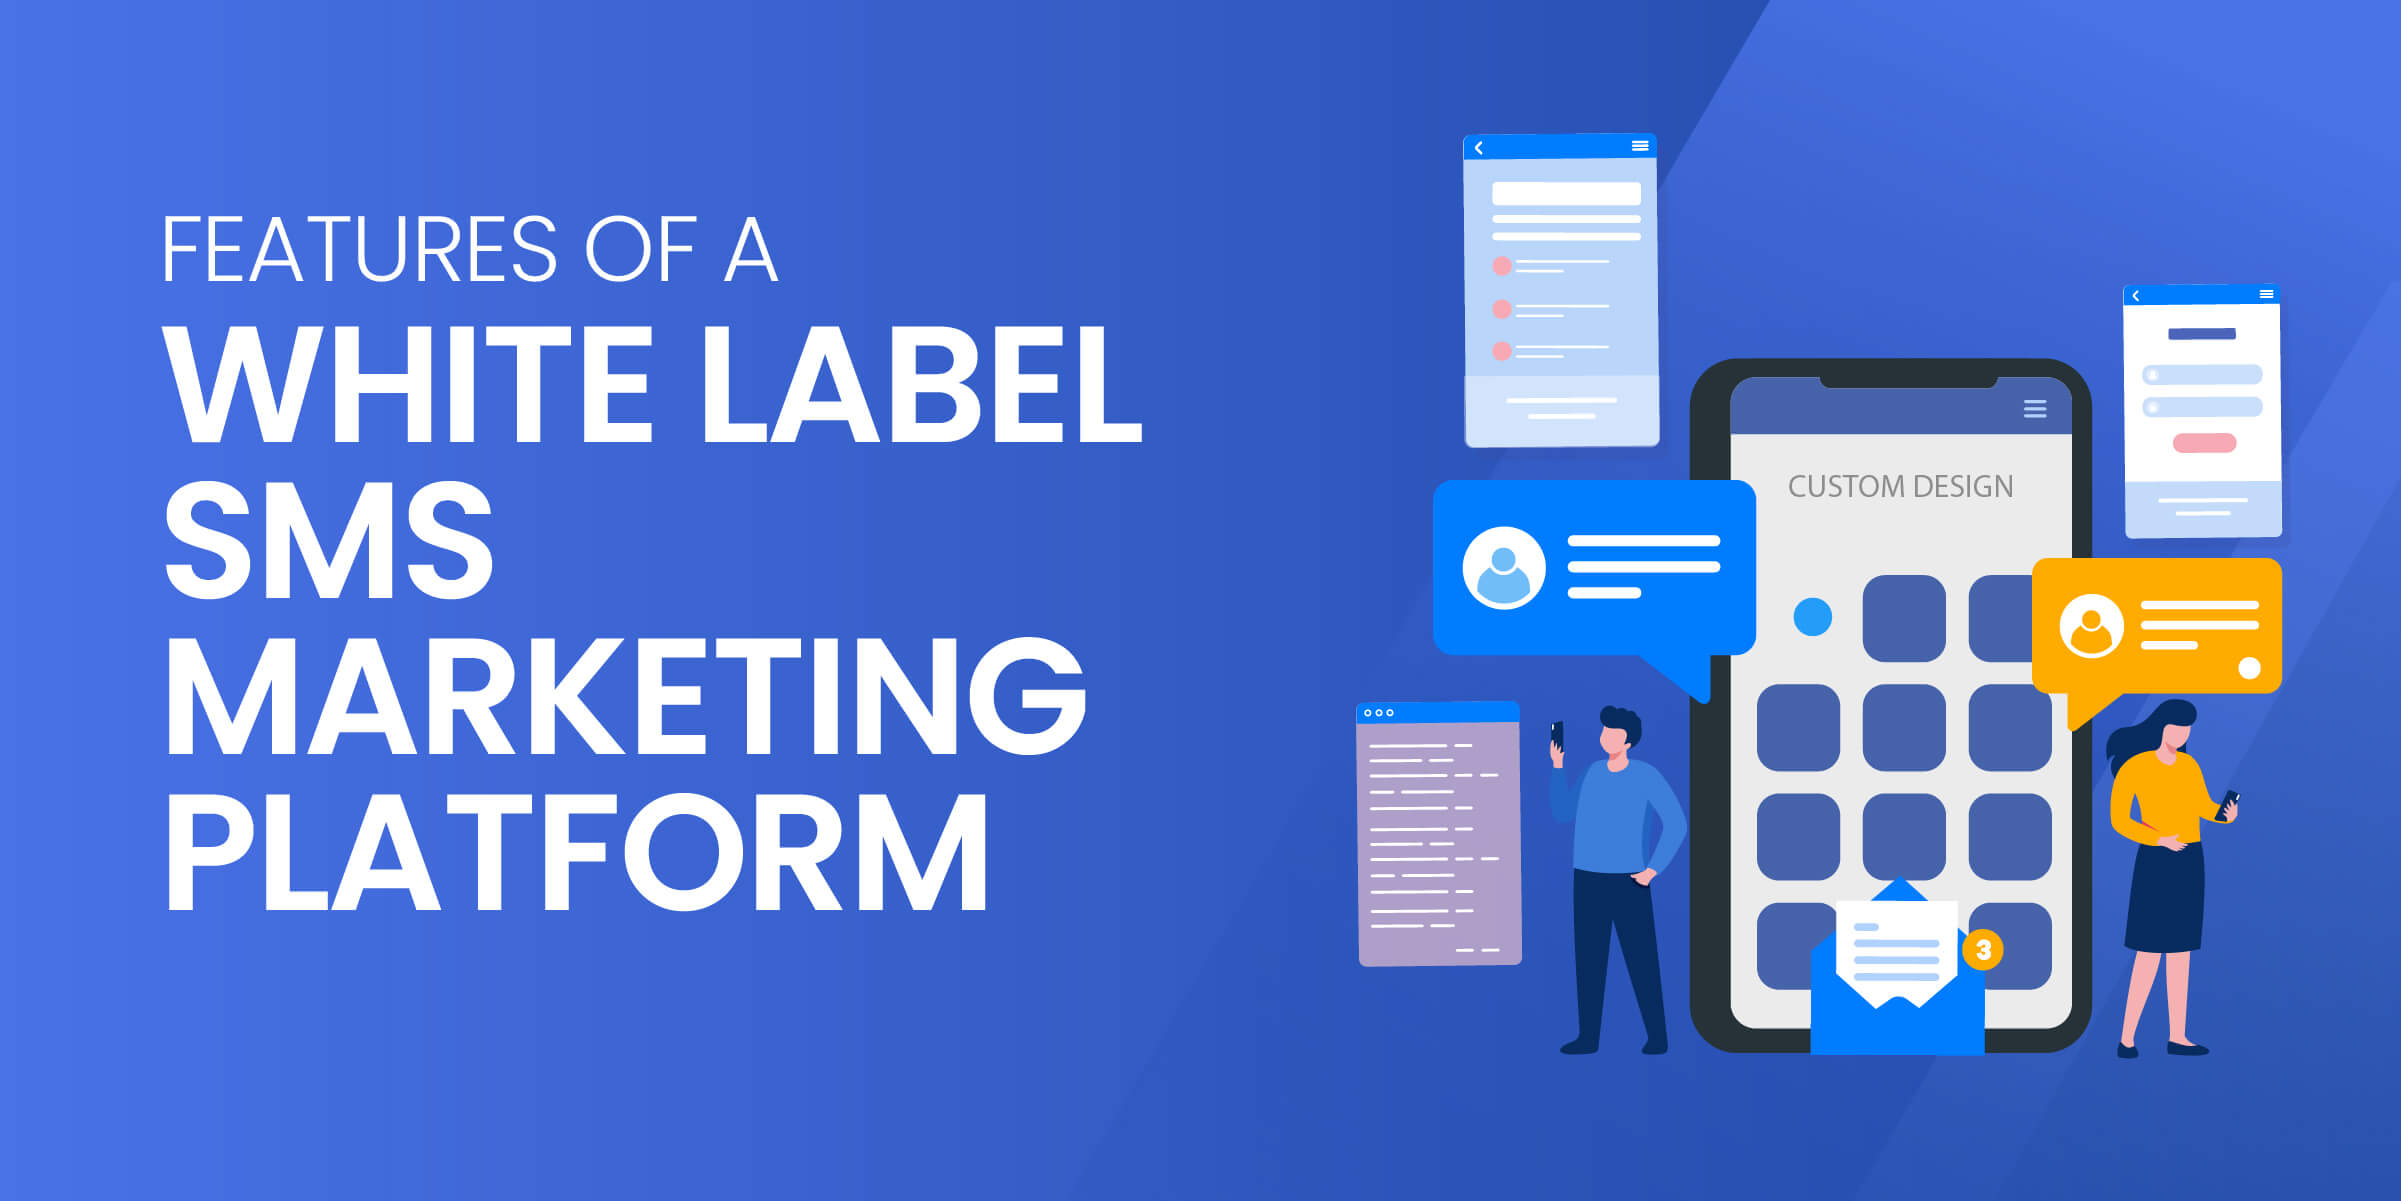 Features of White Label SMS Marketing